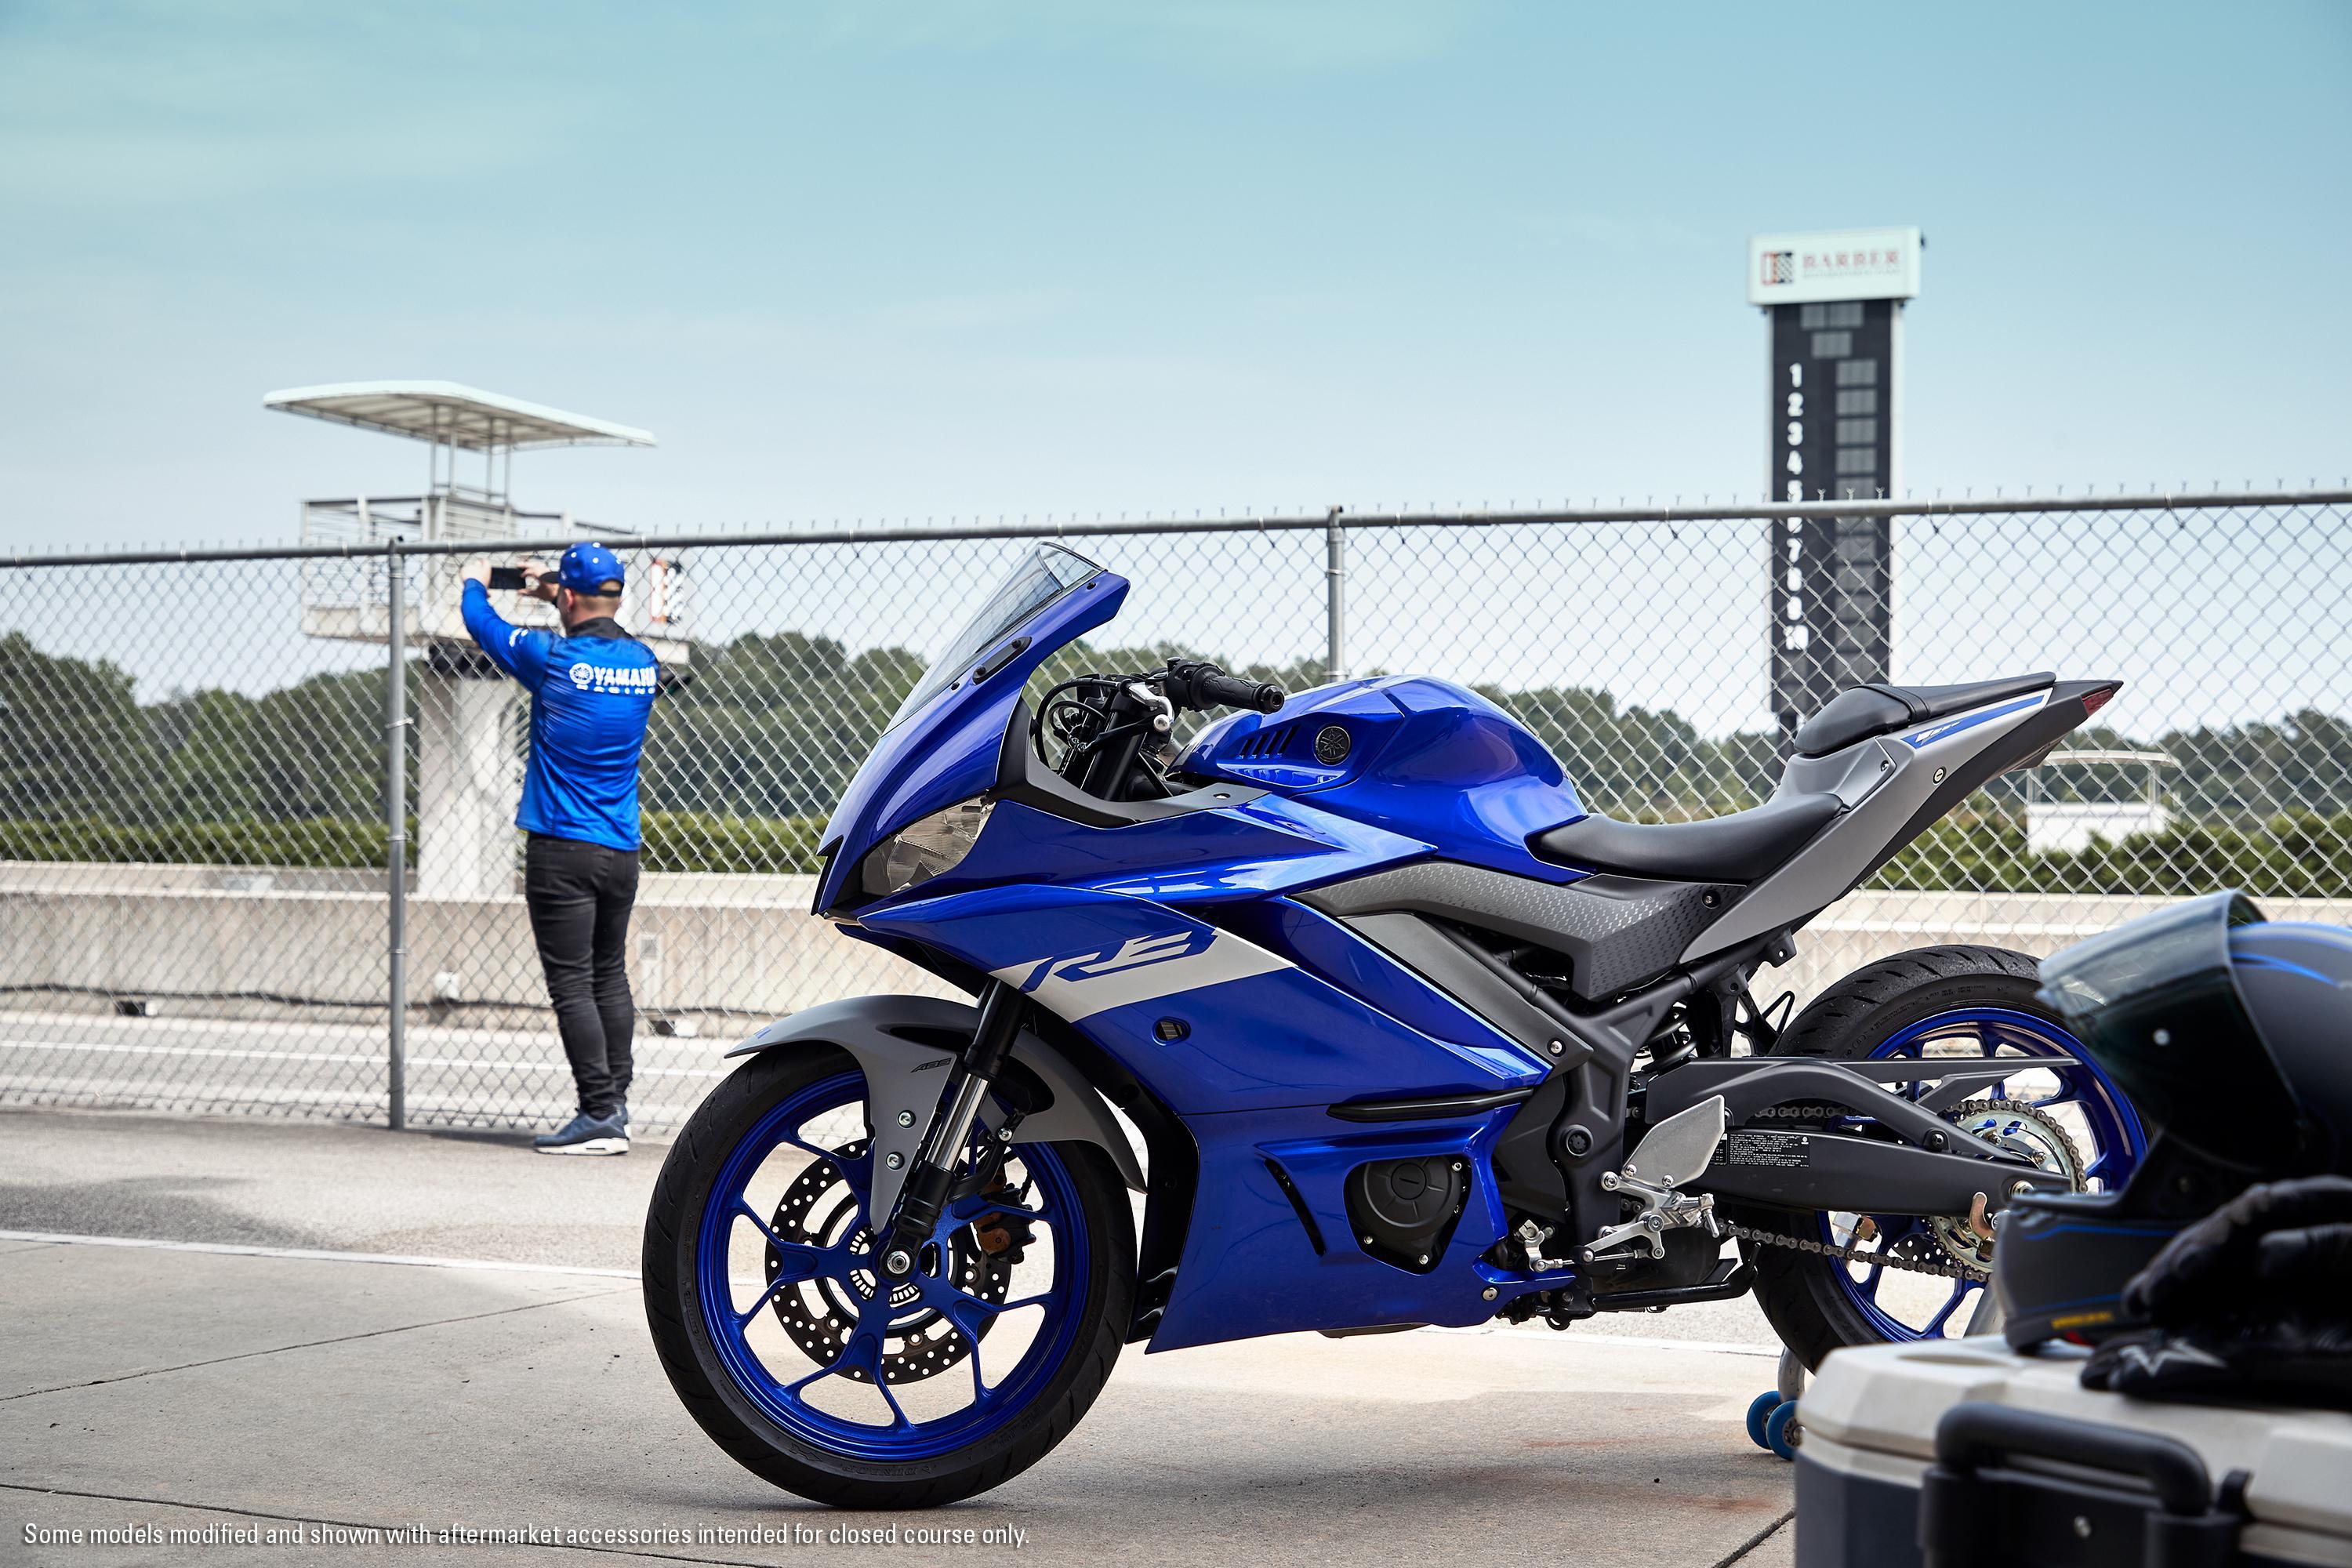 2019 Yamaha R3 (facelift) revealed in Indonesia, India launch on the cards